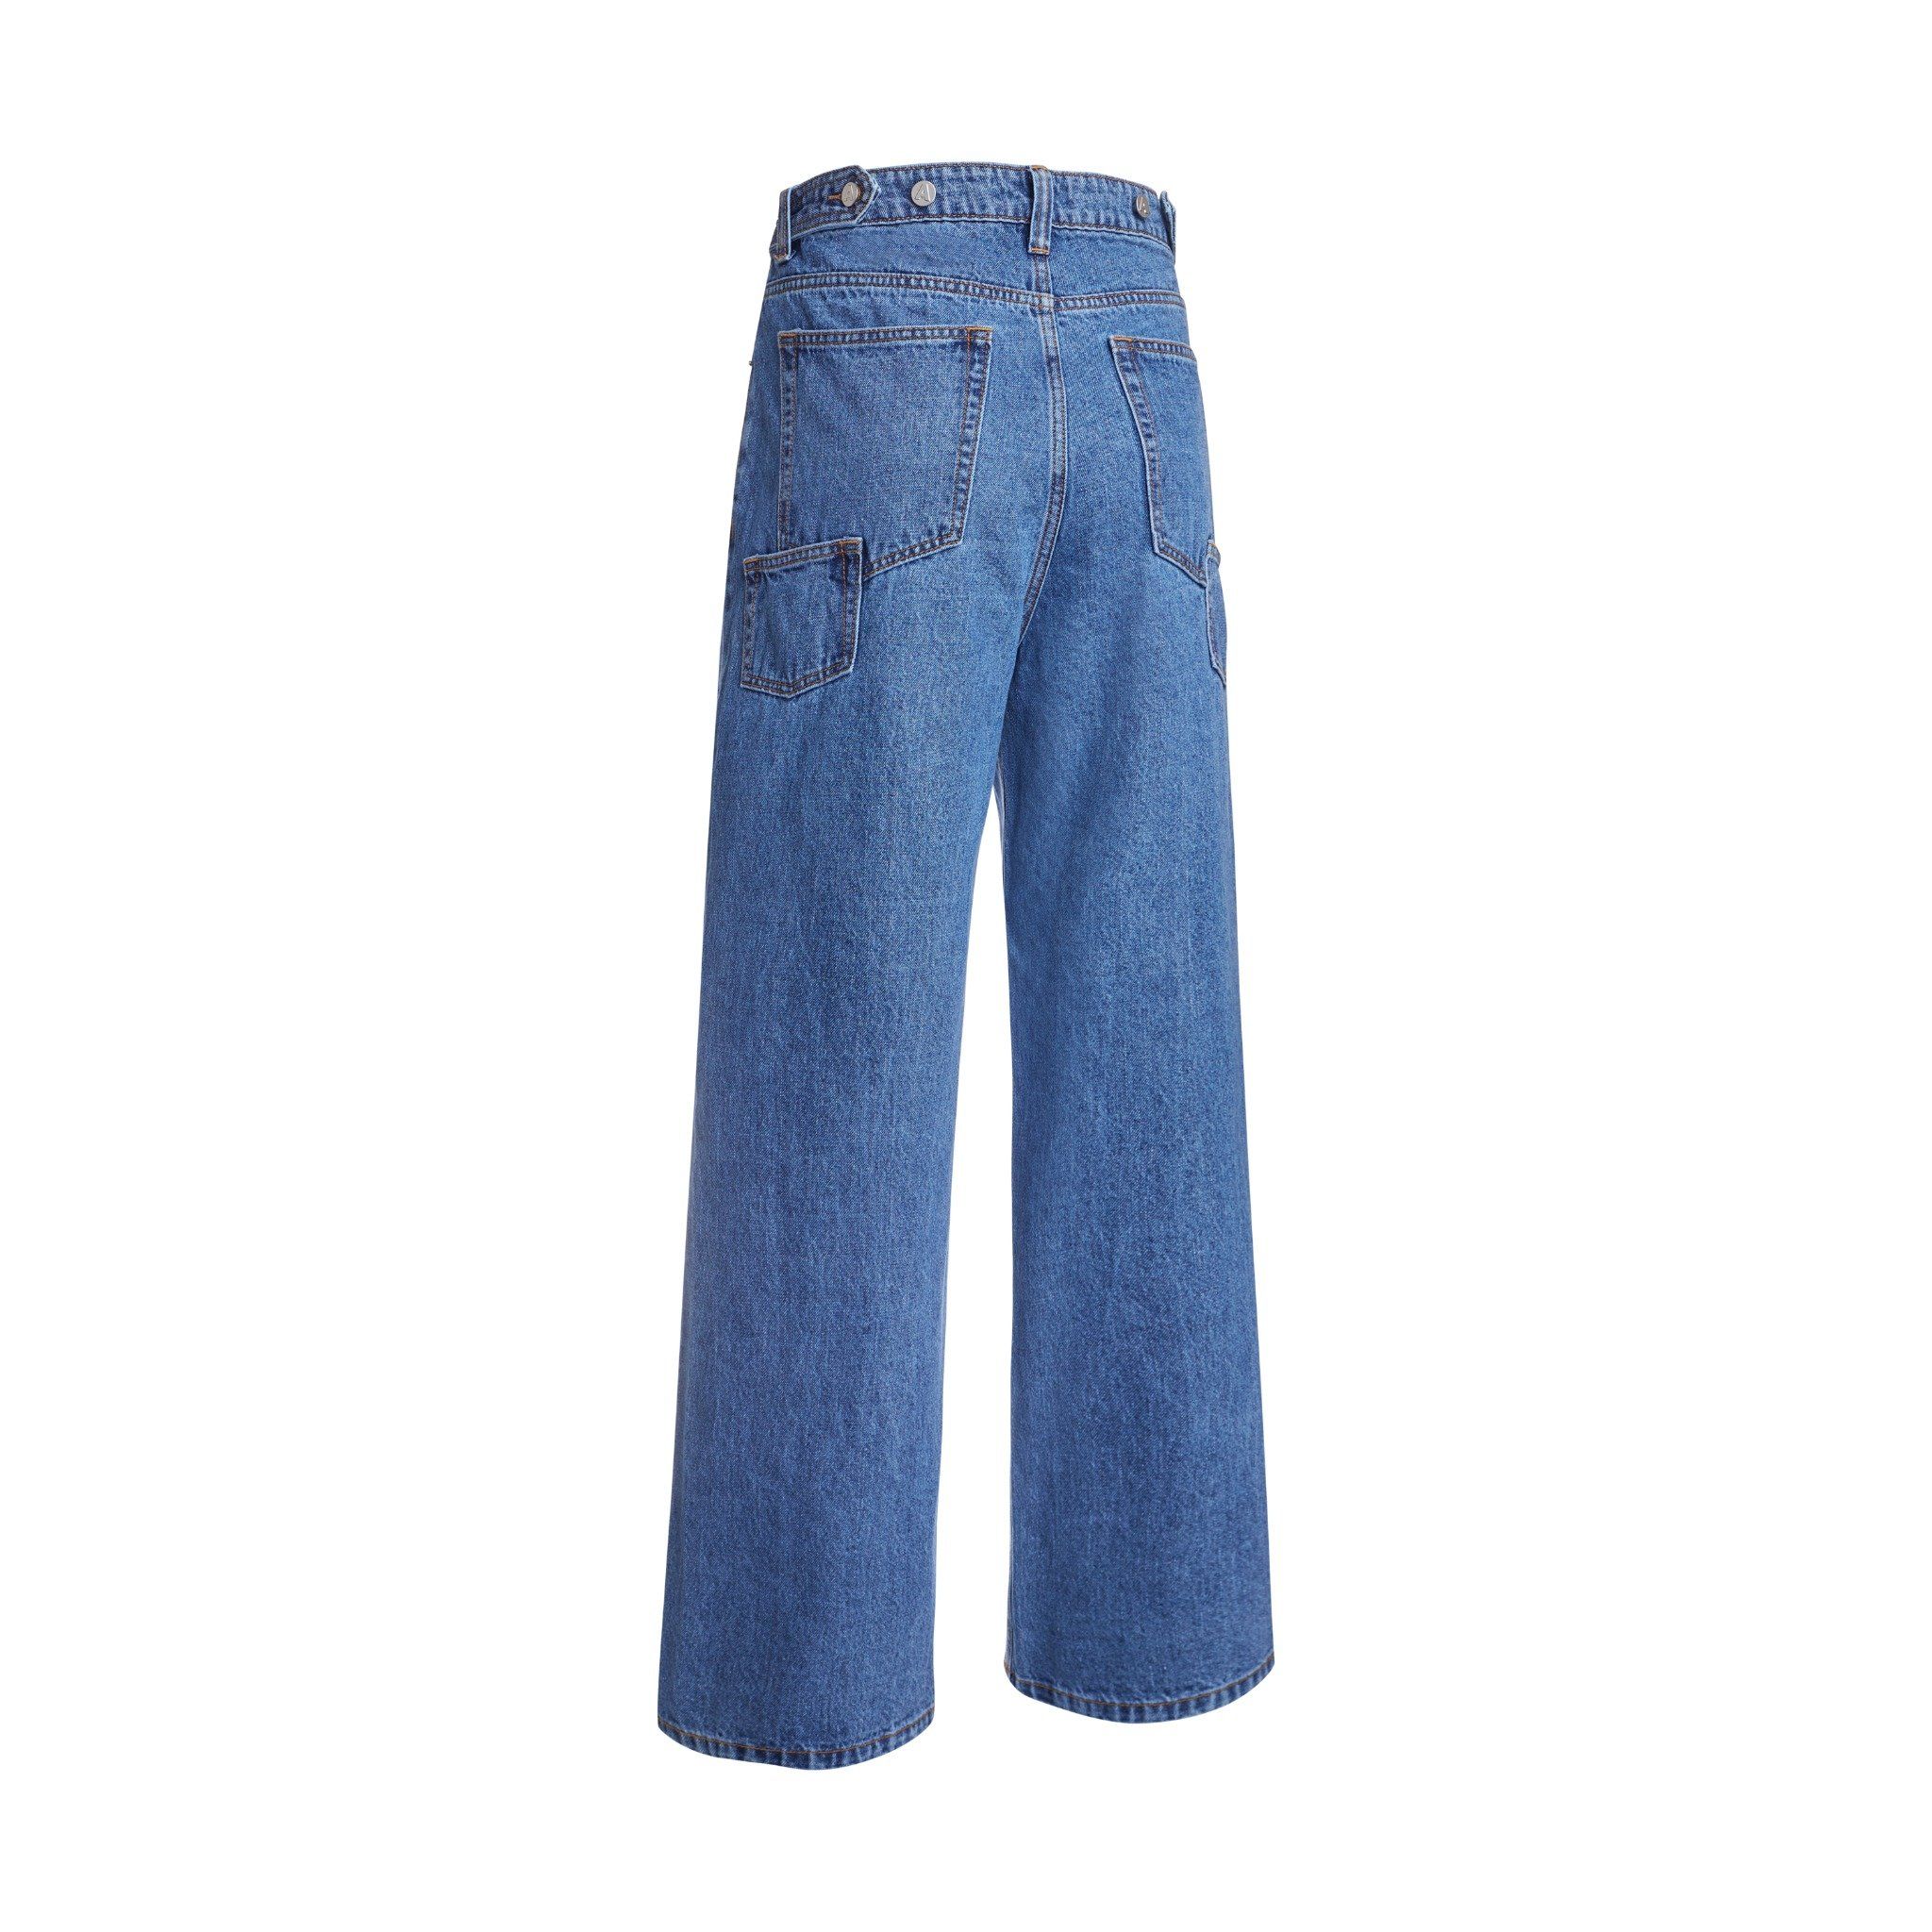  AA RELAX JEANS // BLUE 